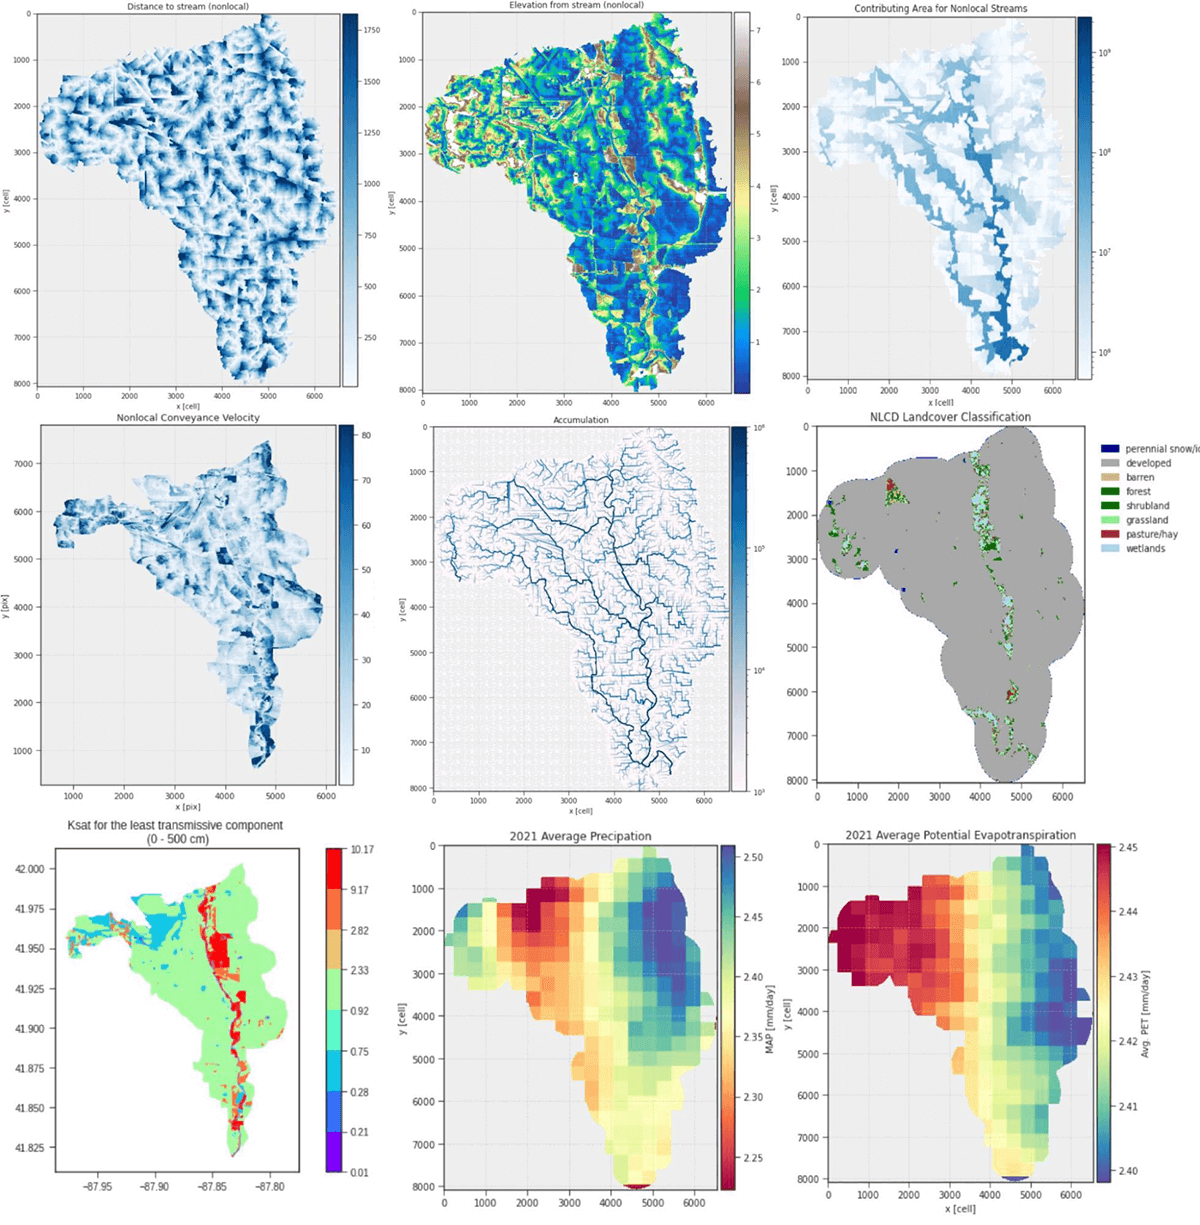 Figure 2: Illustrative maps of the dimensional features first used to build the initial model for the 071200040506 HUC12 (12-digit hydrologic unit code) from the categorization used by the United States Geological Survey (USGS Water Resources: About USGS Water Resources).